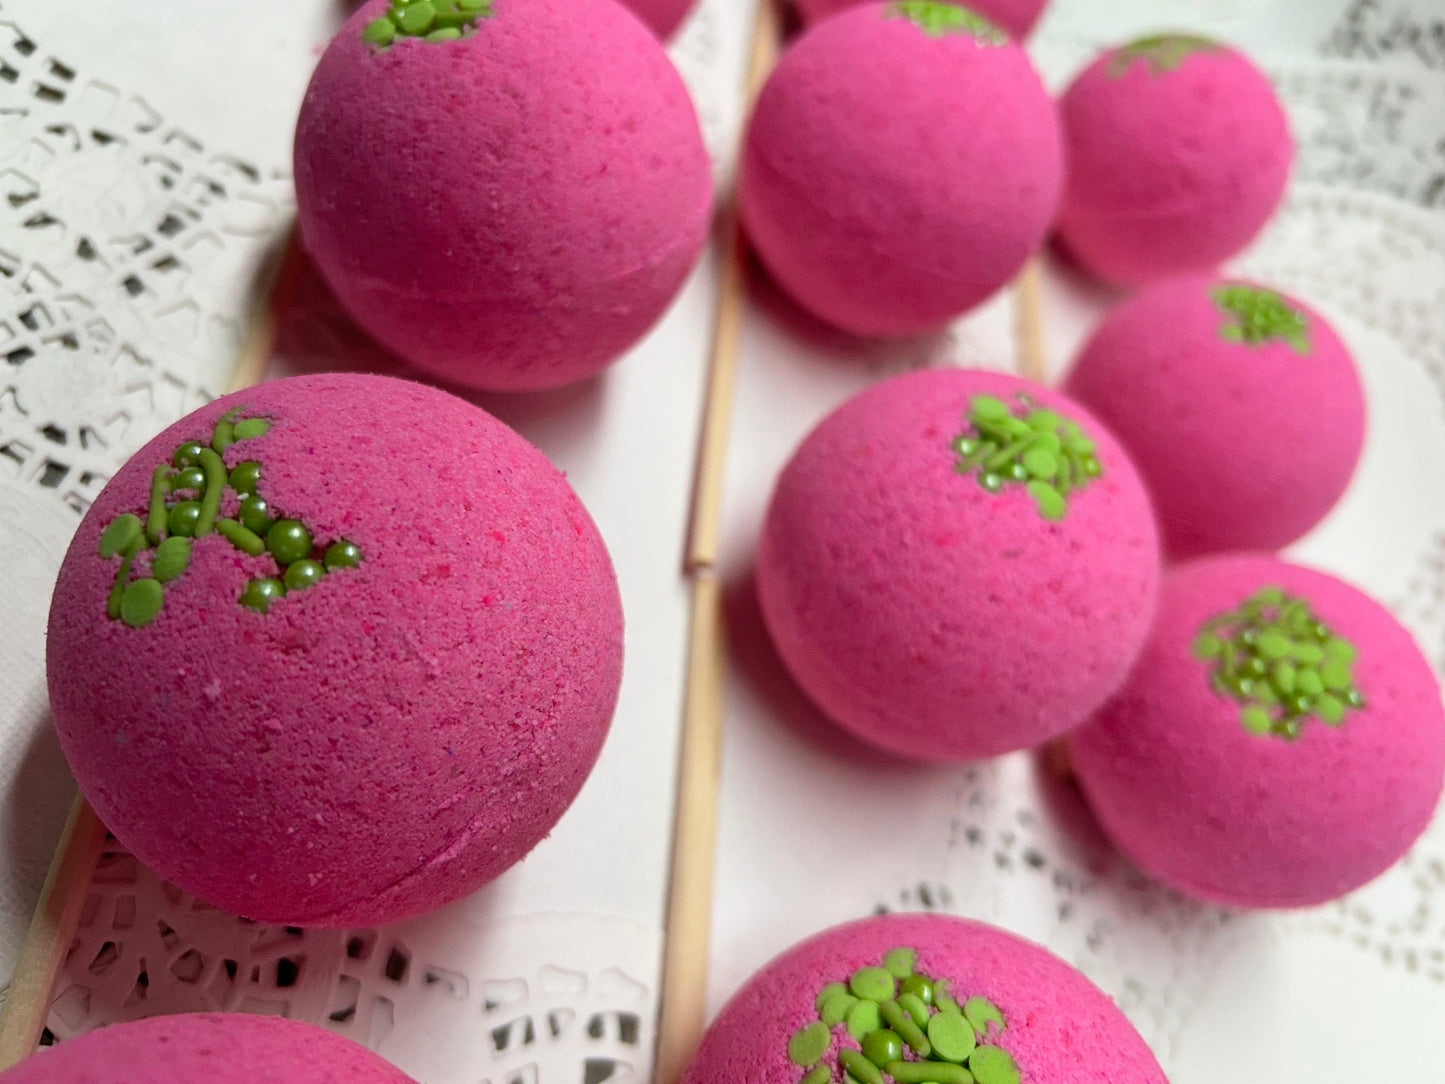 Bath Bomb - Fresh Cut Roses Scented Bath Bombs with Embeds and Candy sprinkled